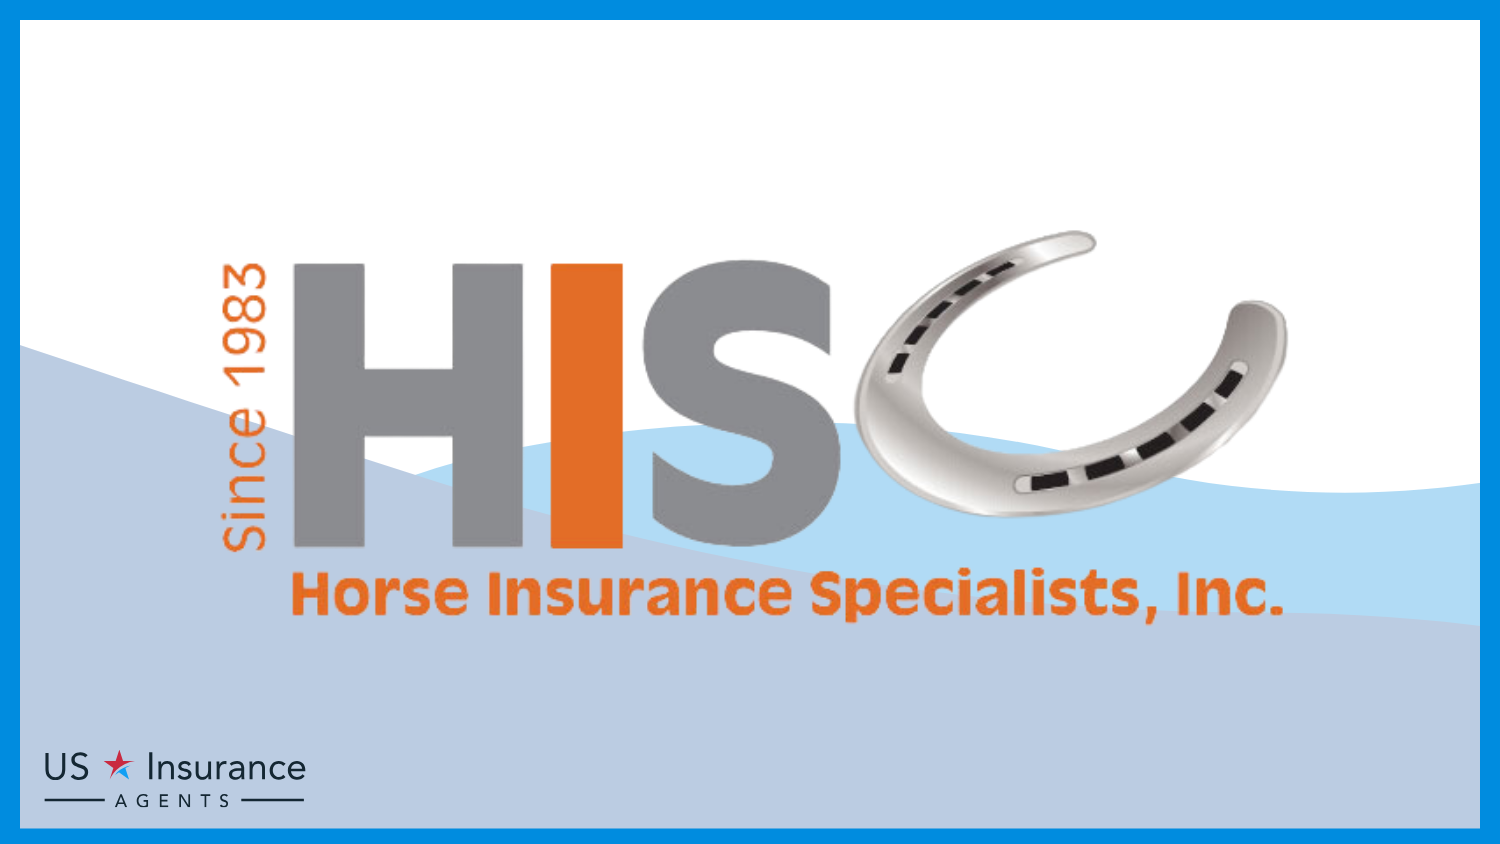 Horse Insurance Specialists: Best Business Insurance for Equine Therapy Companies